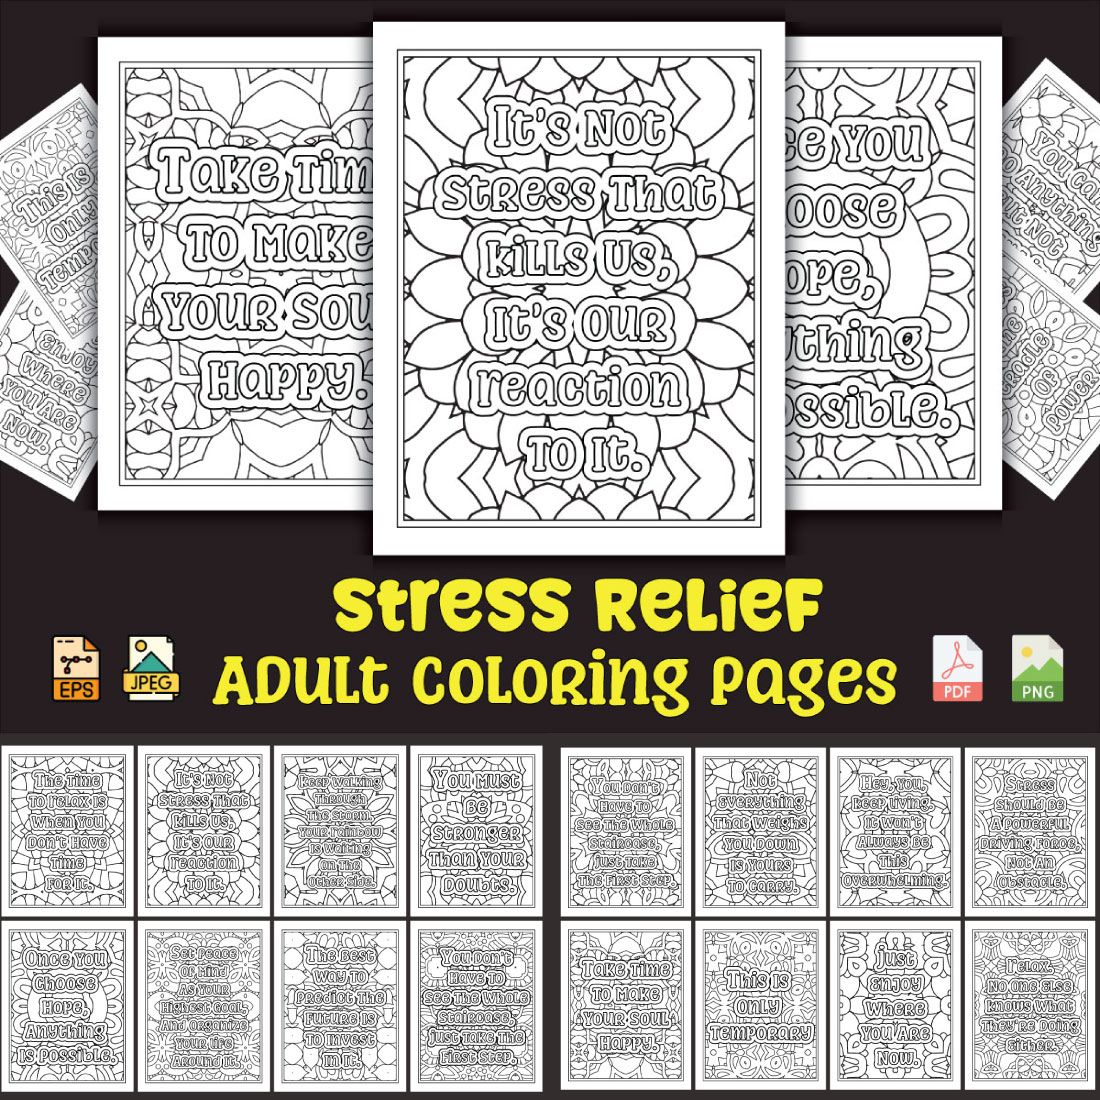 Fashion Forward: A Stress Relieving Adult Coloring Book 